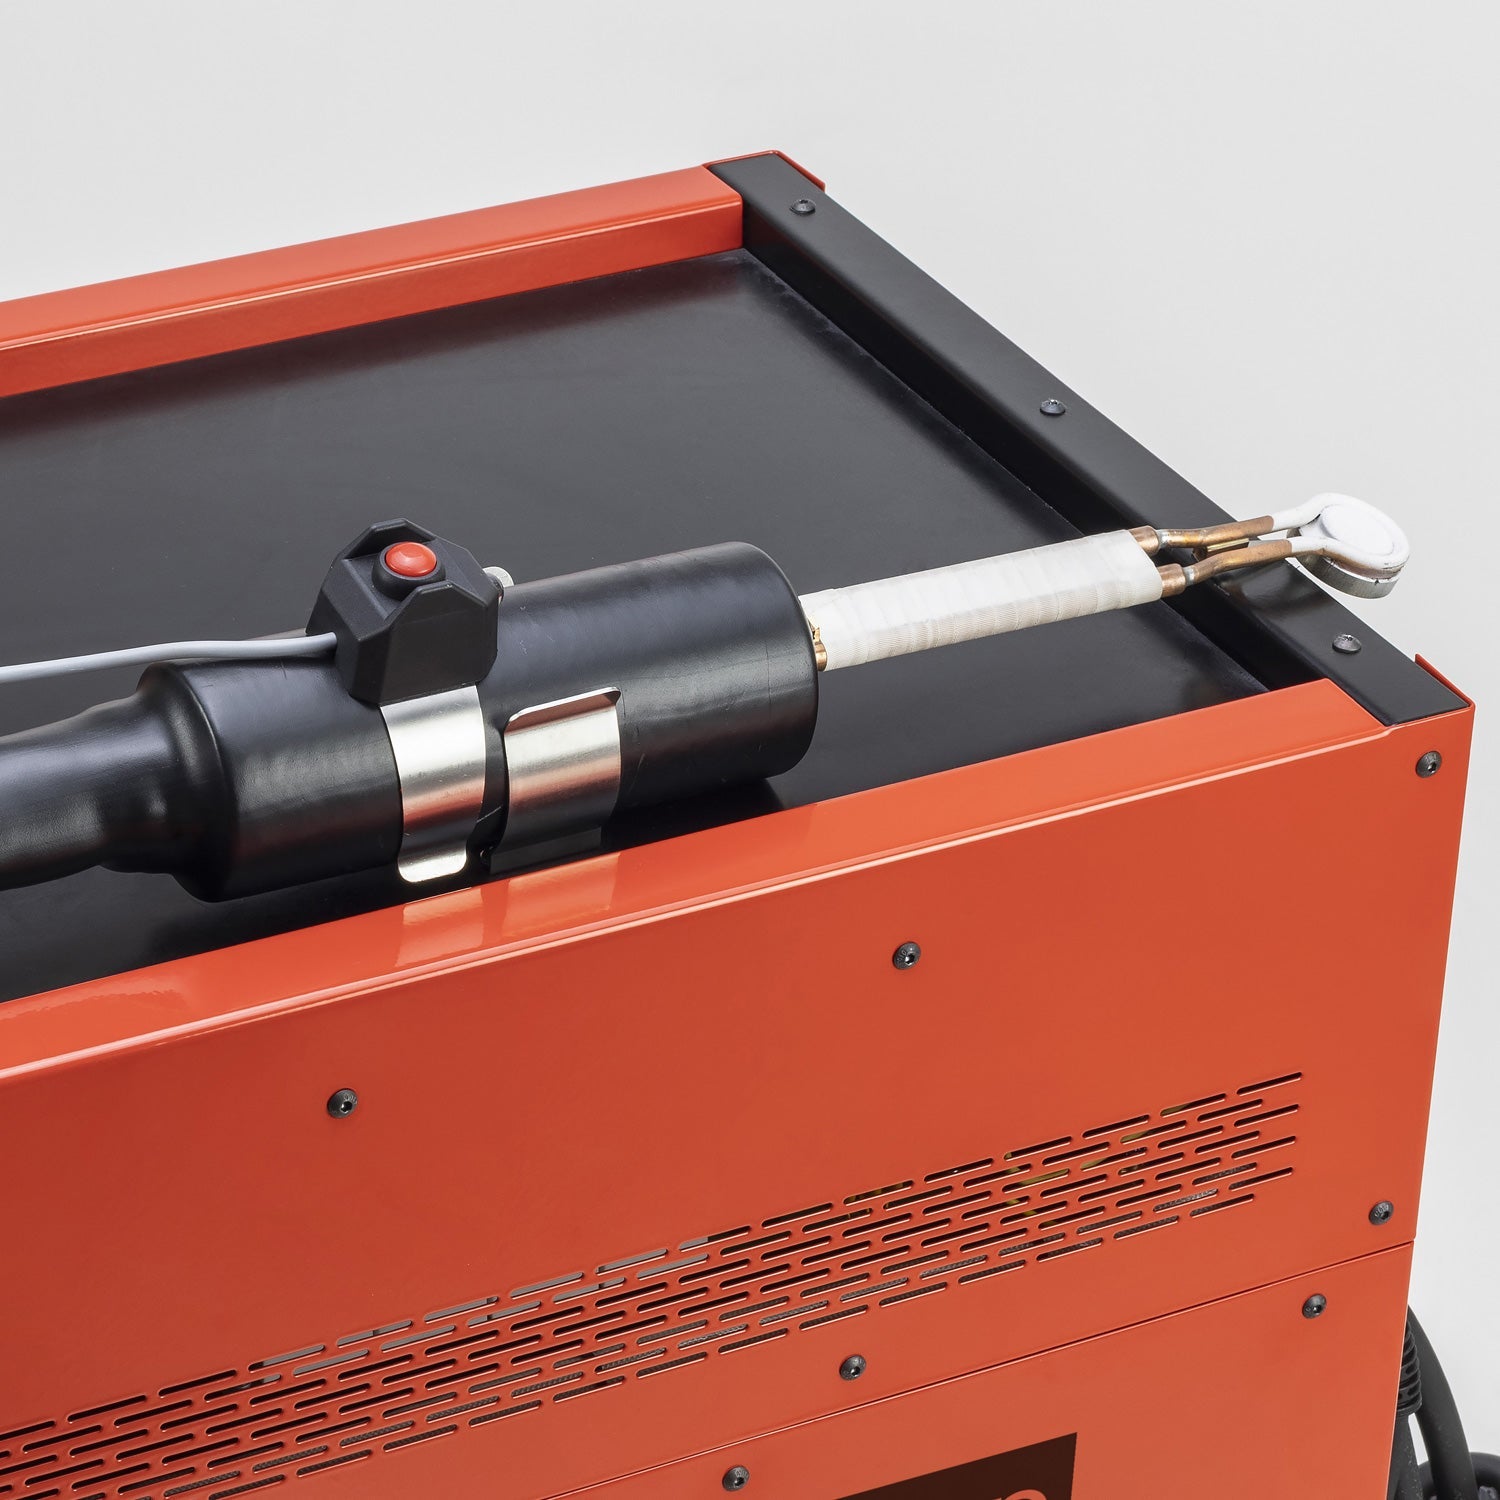 SIP High Power Induction Heaters | Multi Power Options Choice | Portable & Lightweight